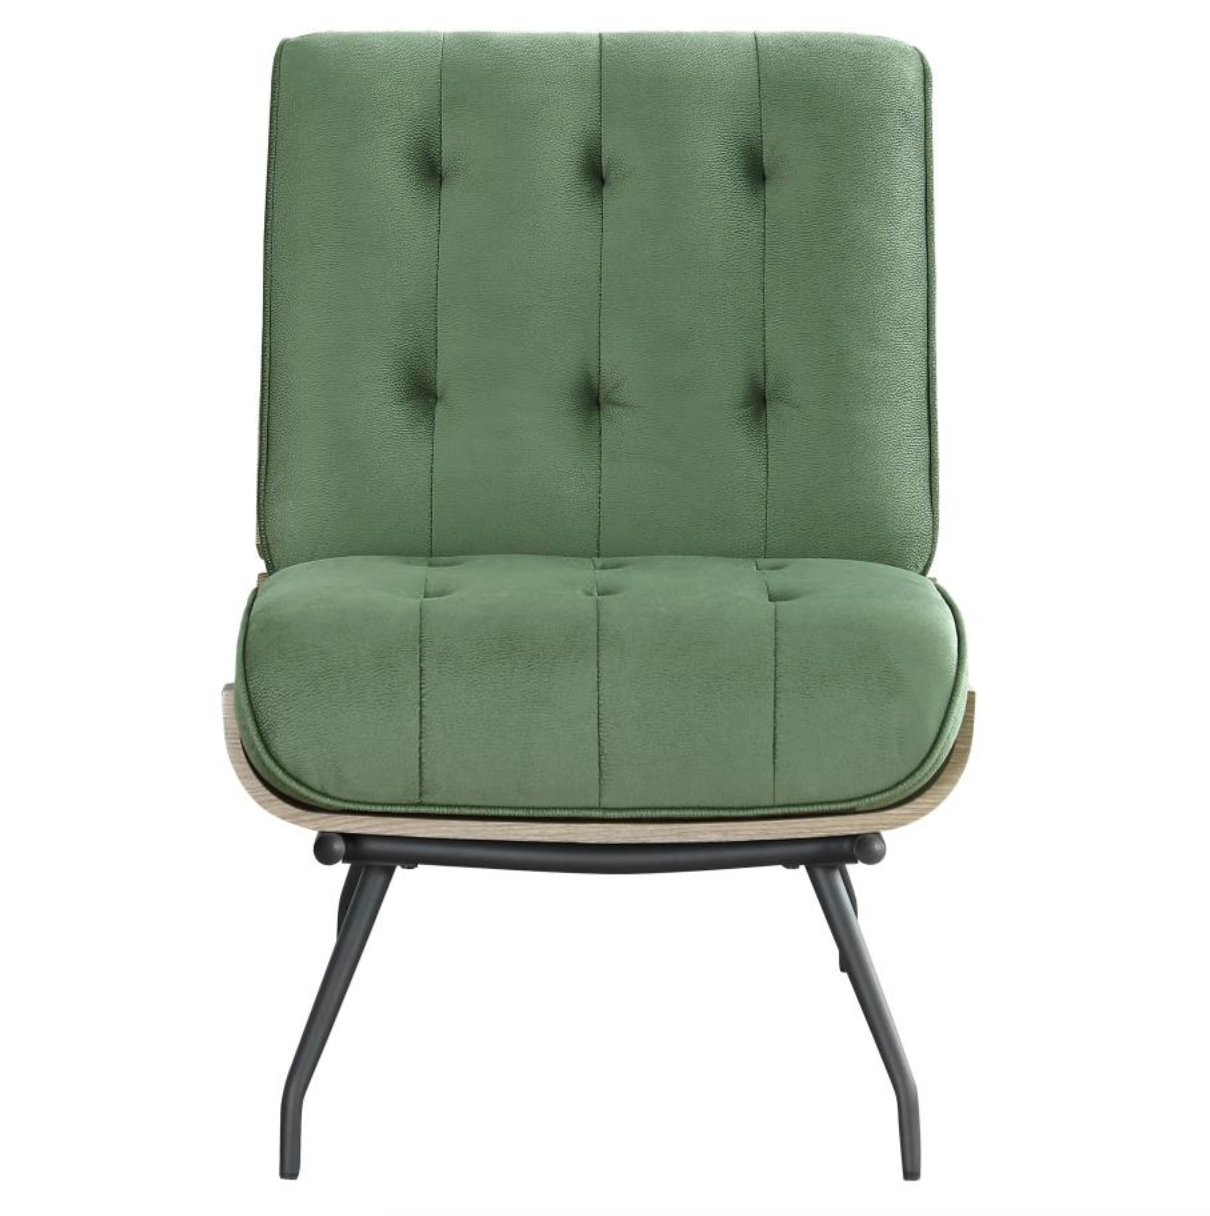 ALOMA Armless Tufted Accent Chair Green